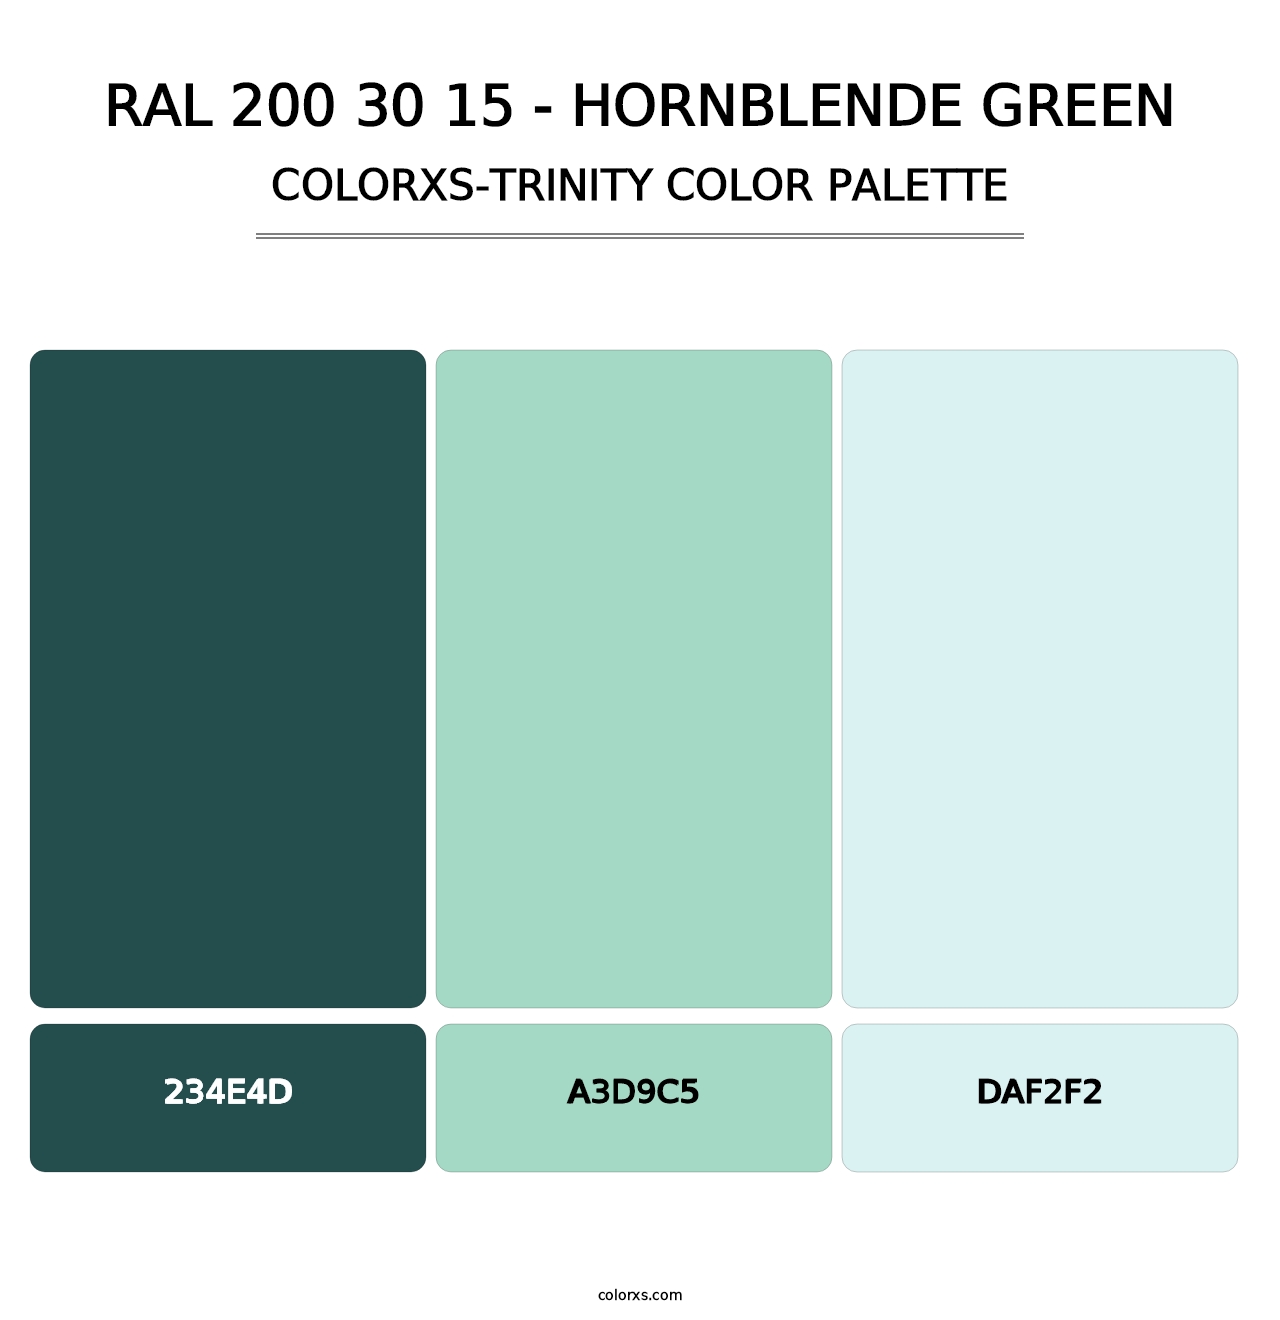 RAL 200 30 15 - Hornblende Green - Colorxs Trinity Palette